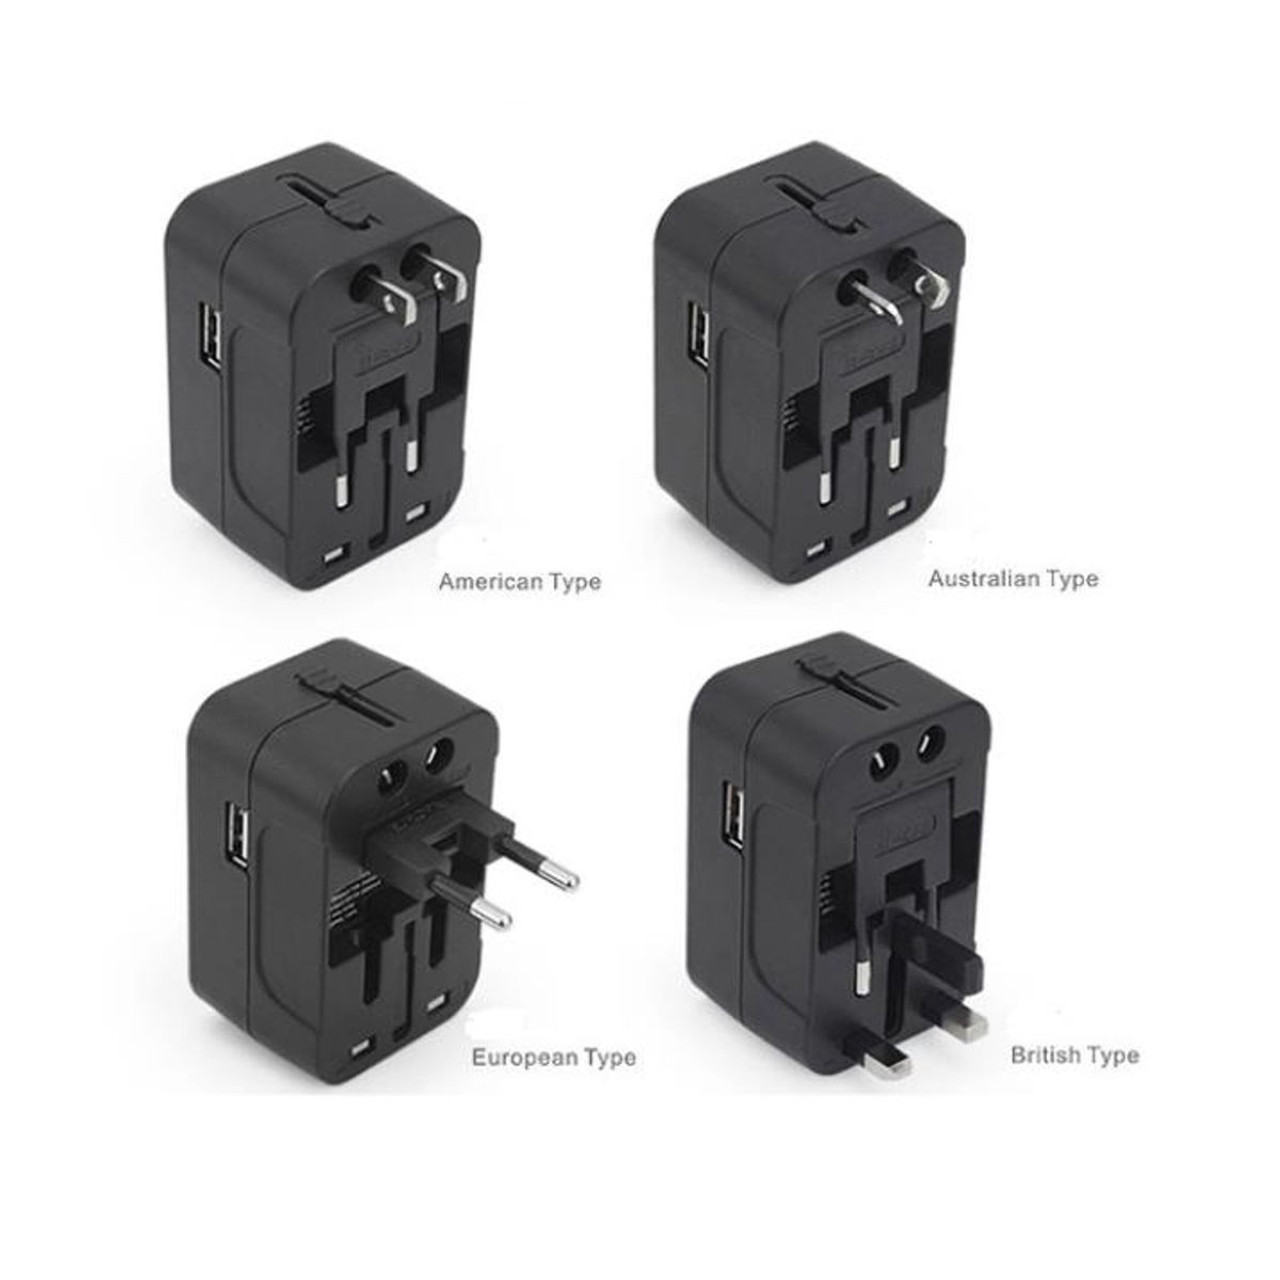 Universal Travel Adapter with USB Ports product image